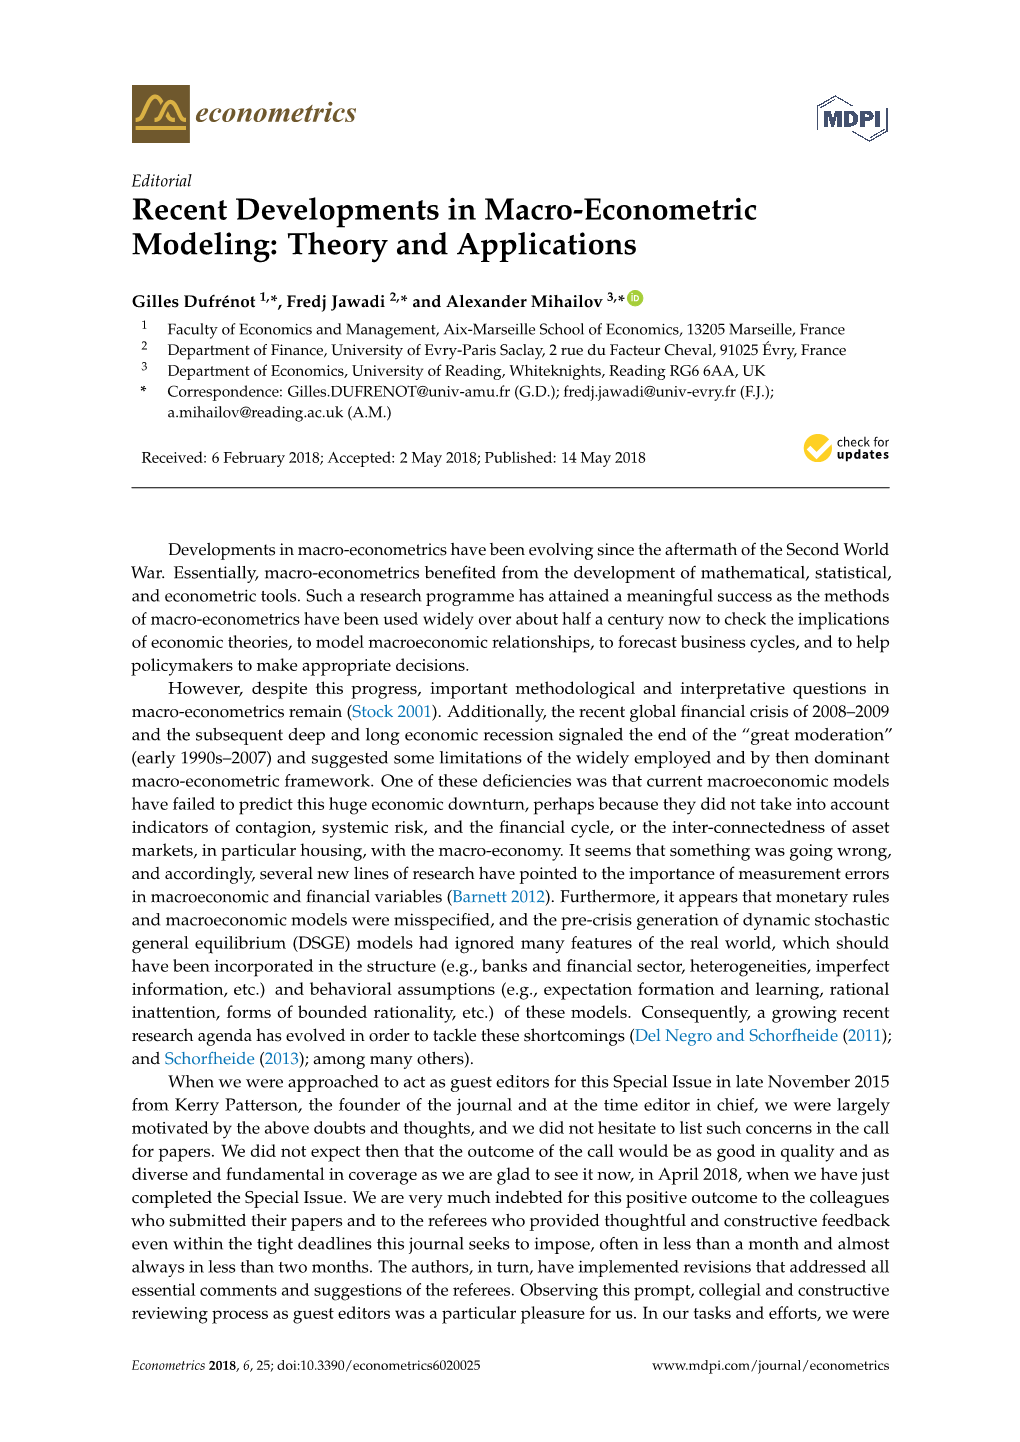 Recent Developments in Macro-Econometric Modeling: Theory and Applications